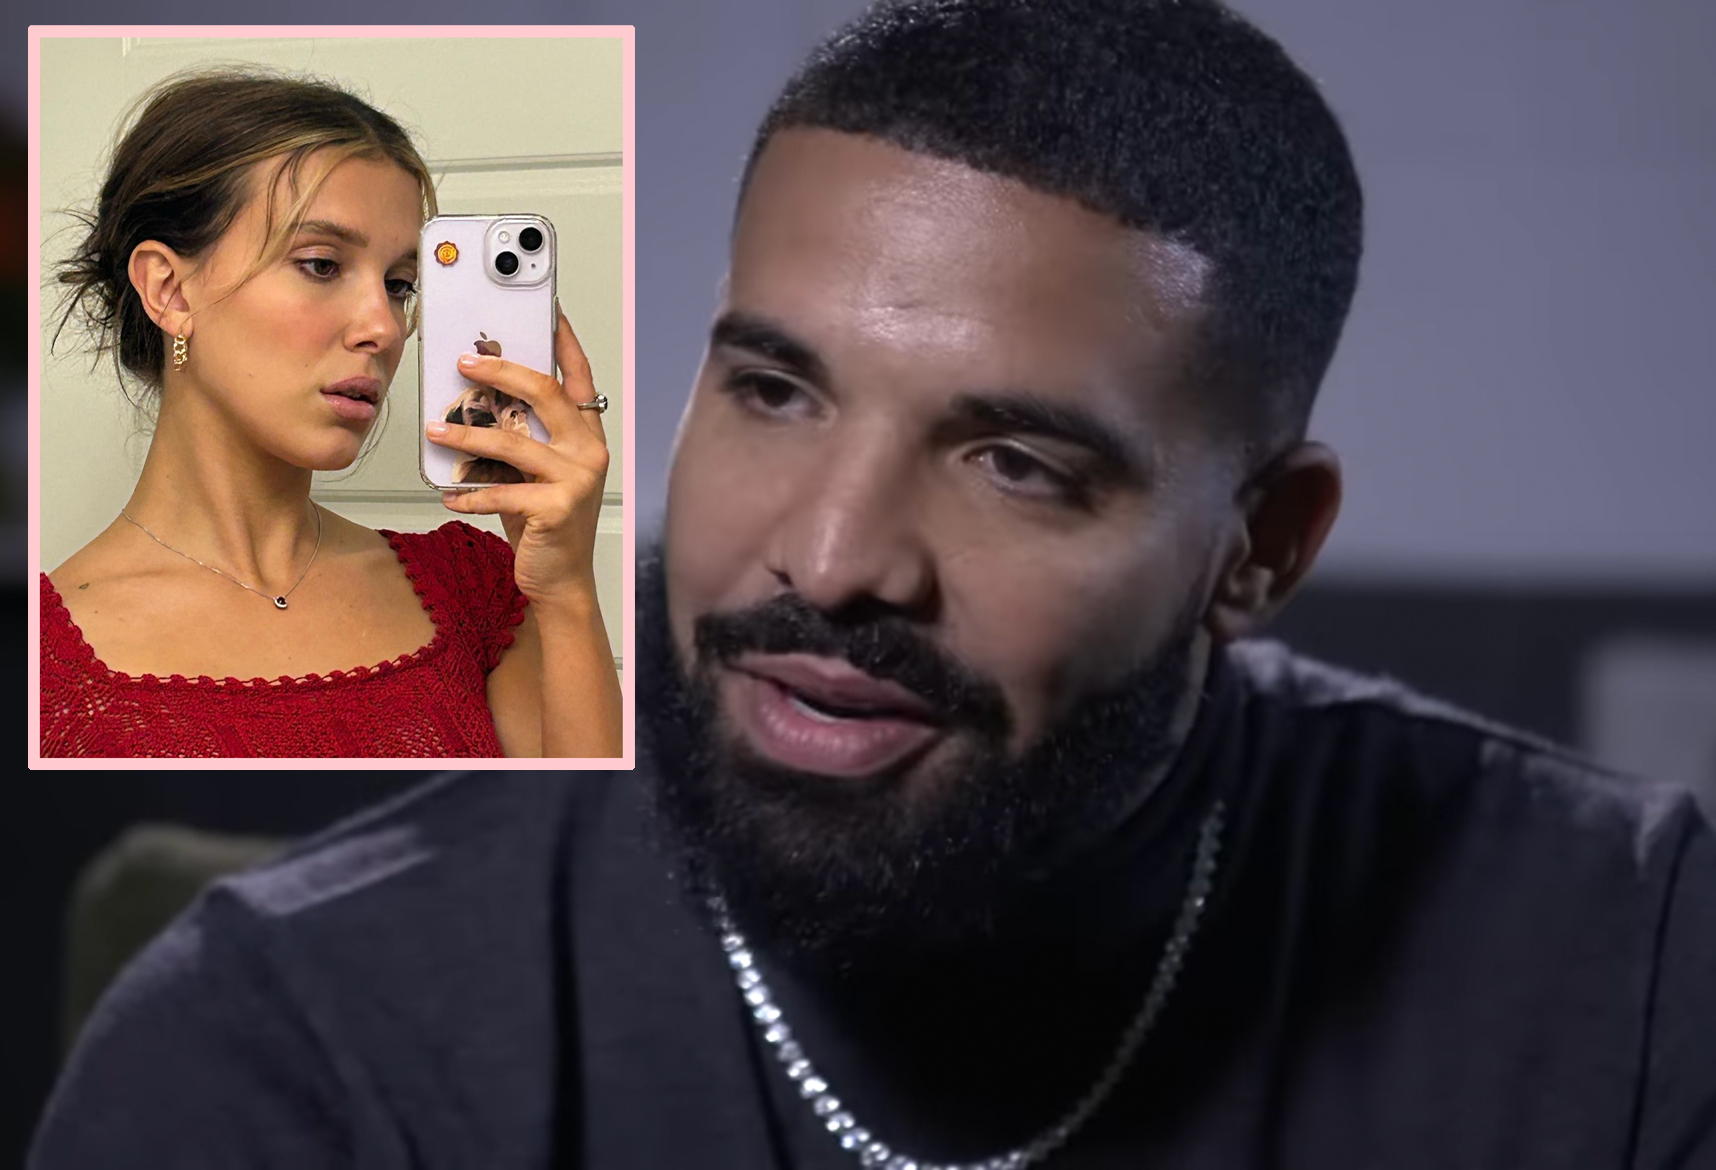 #Drake Calls Out ‘Weirdos’ For Criticizing His Friendship With Millie Bobby Brown In New Song Another Late Night!